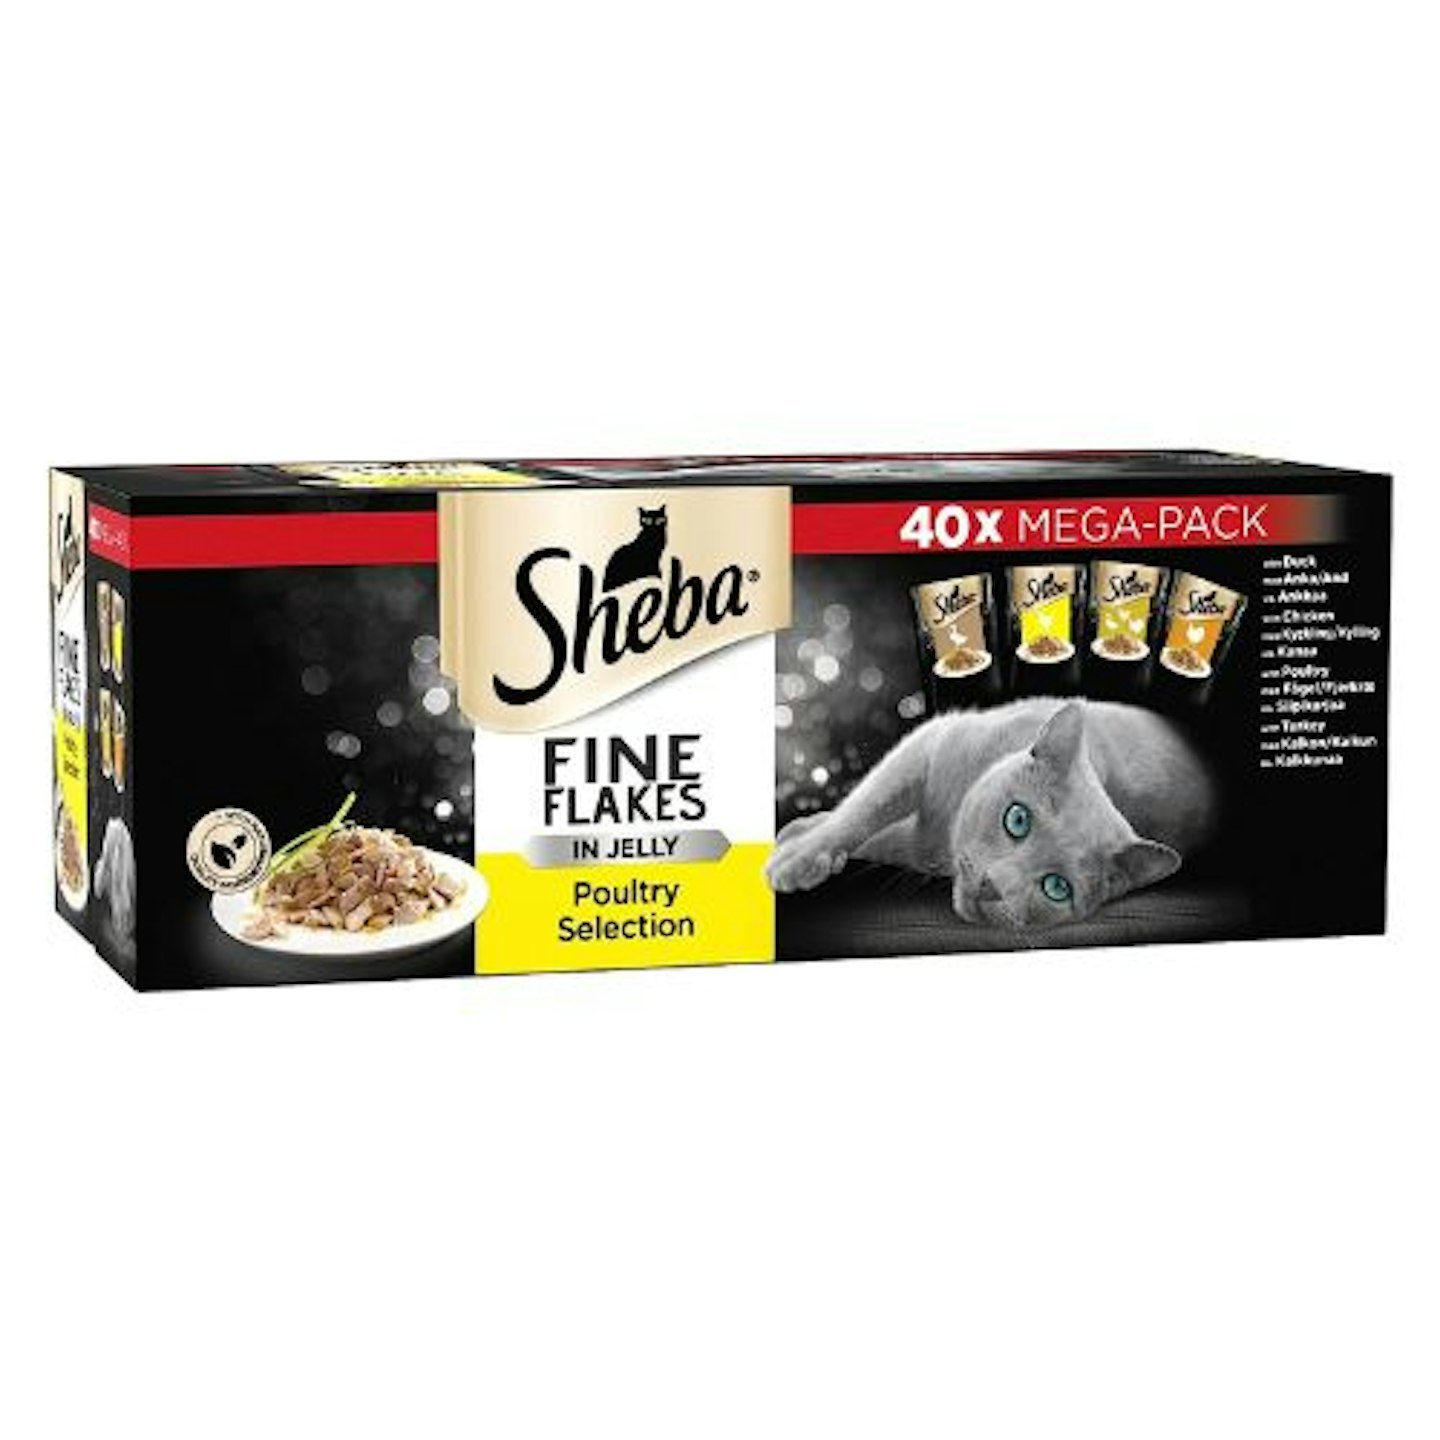 Sheba Fine Flakes Poultry Collection in Jelly